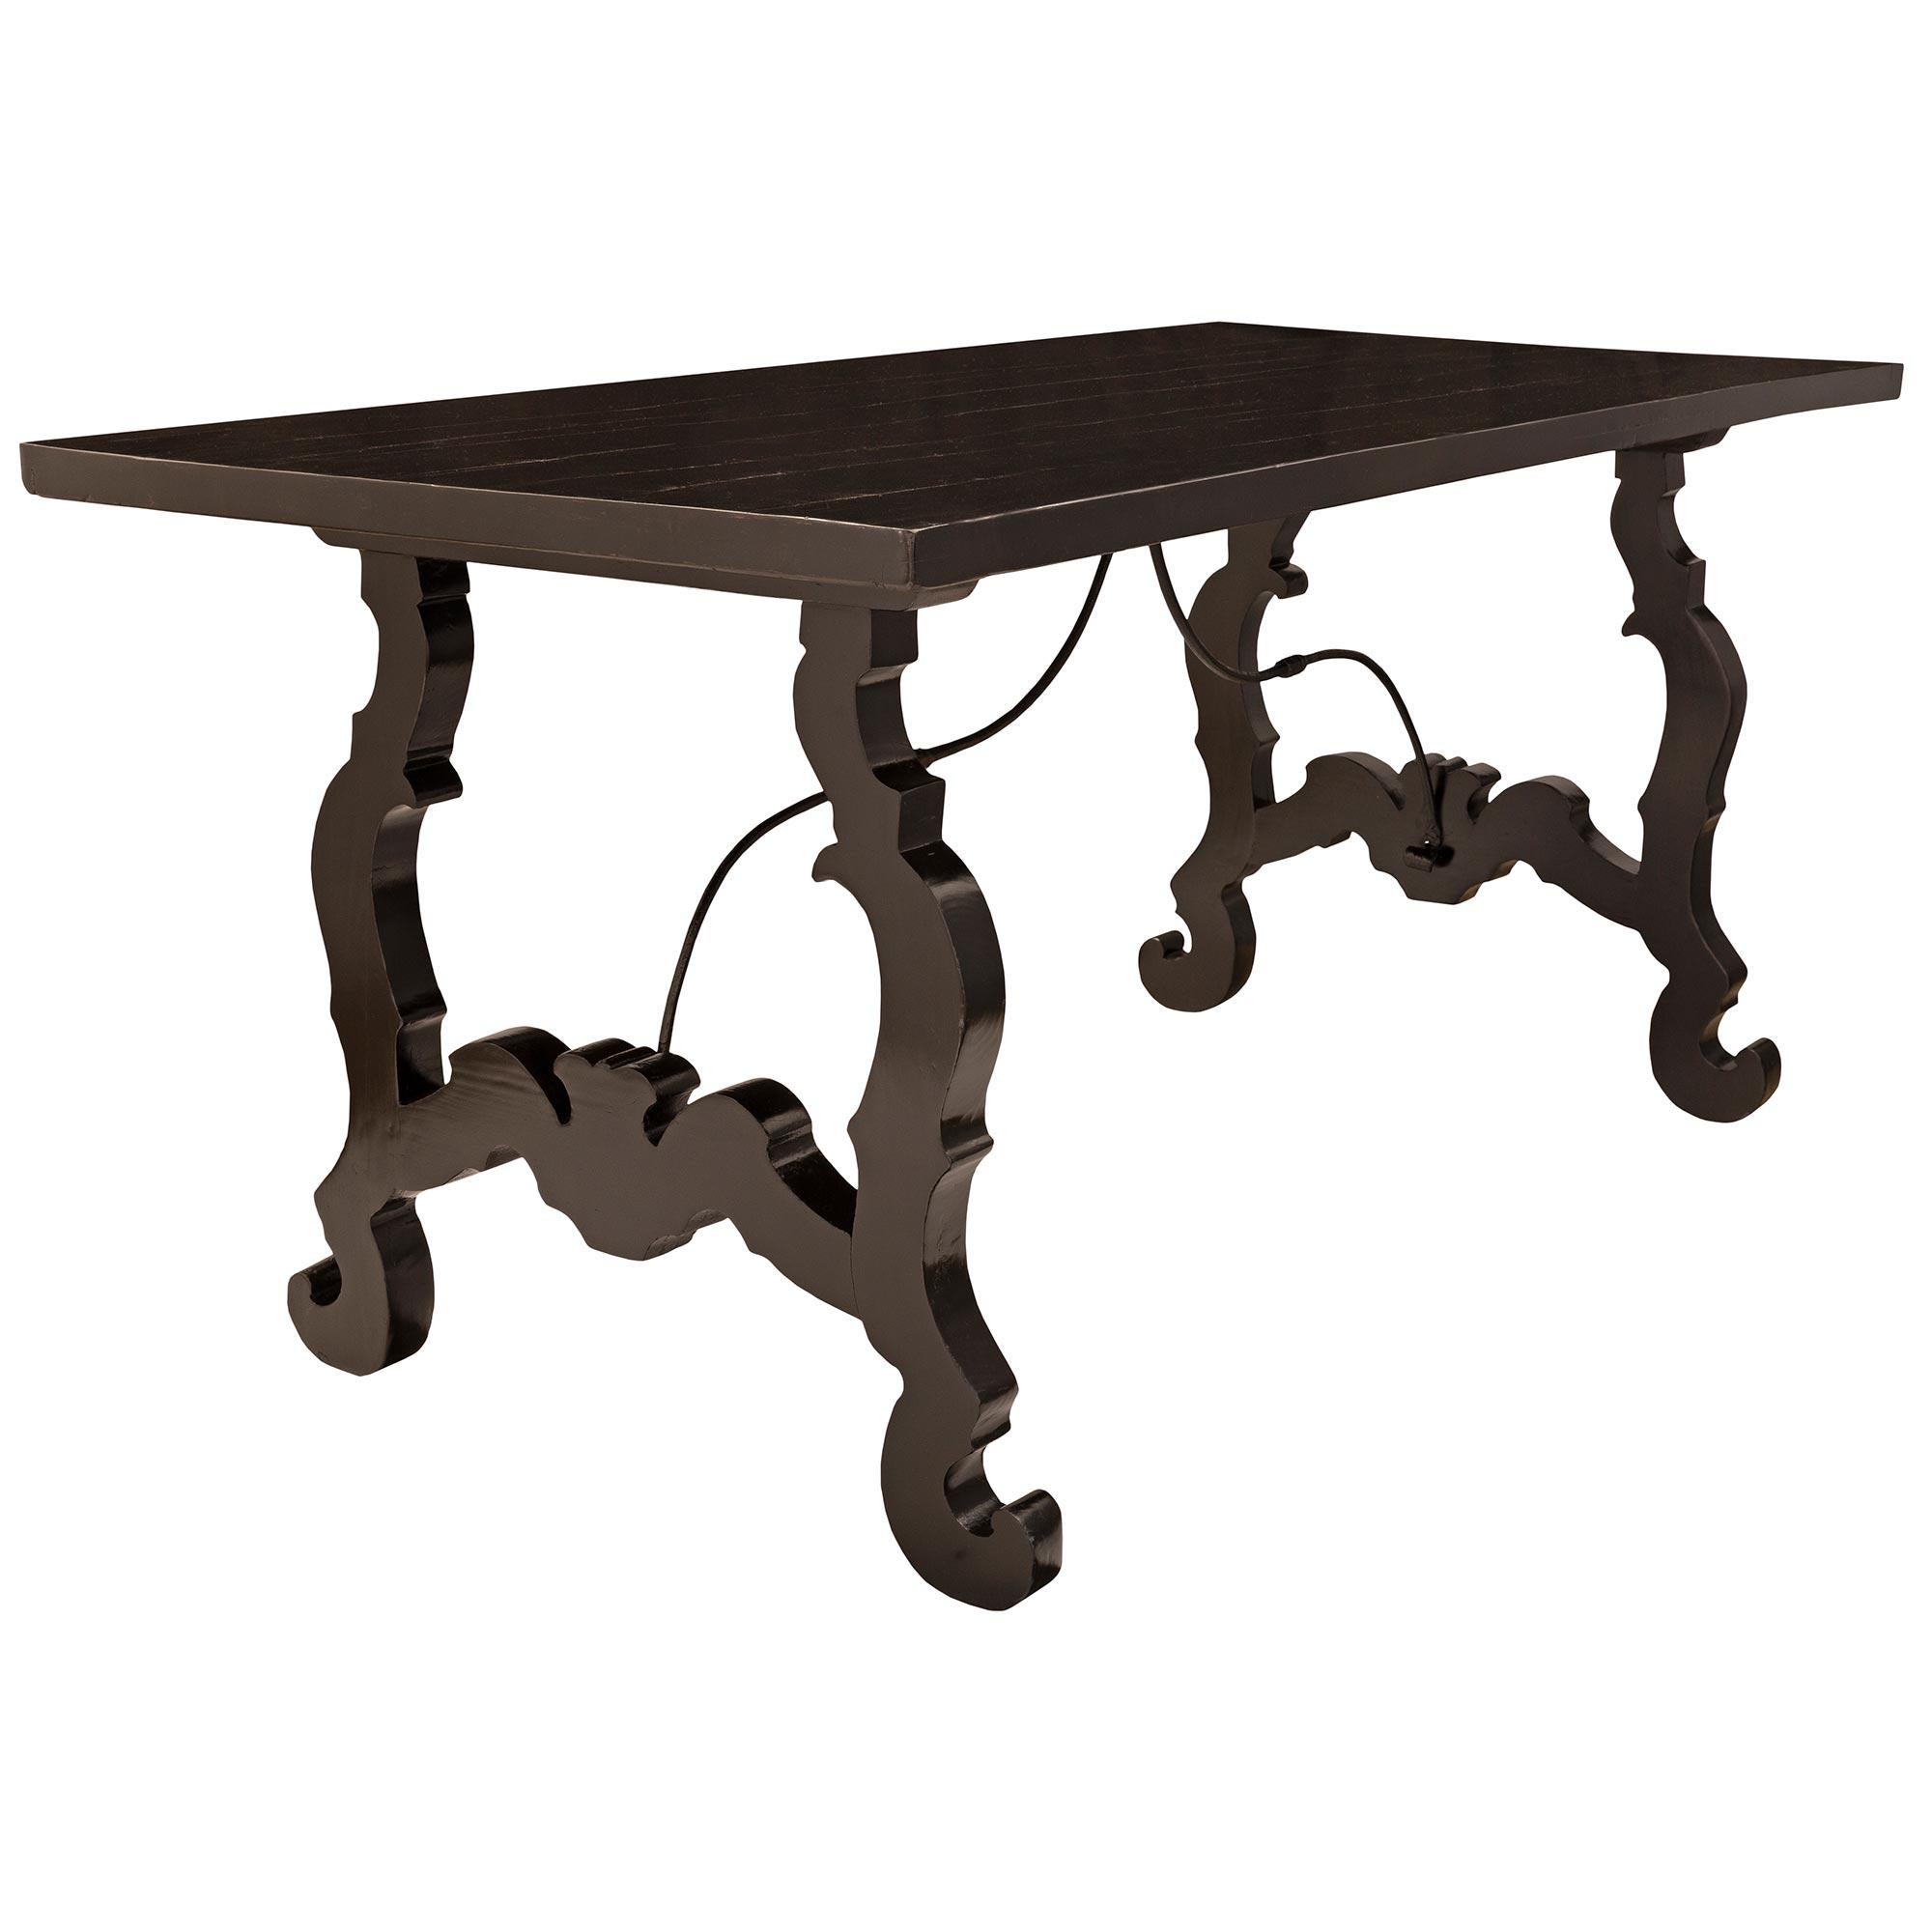 Italian 18th Century Ebonized Fruitwood Trestle Table In Good Condition For Sale In West Palm Beach, FL